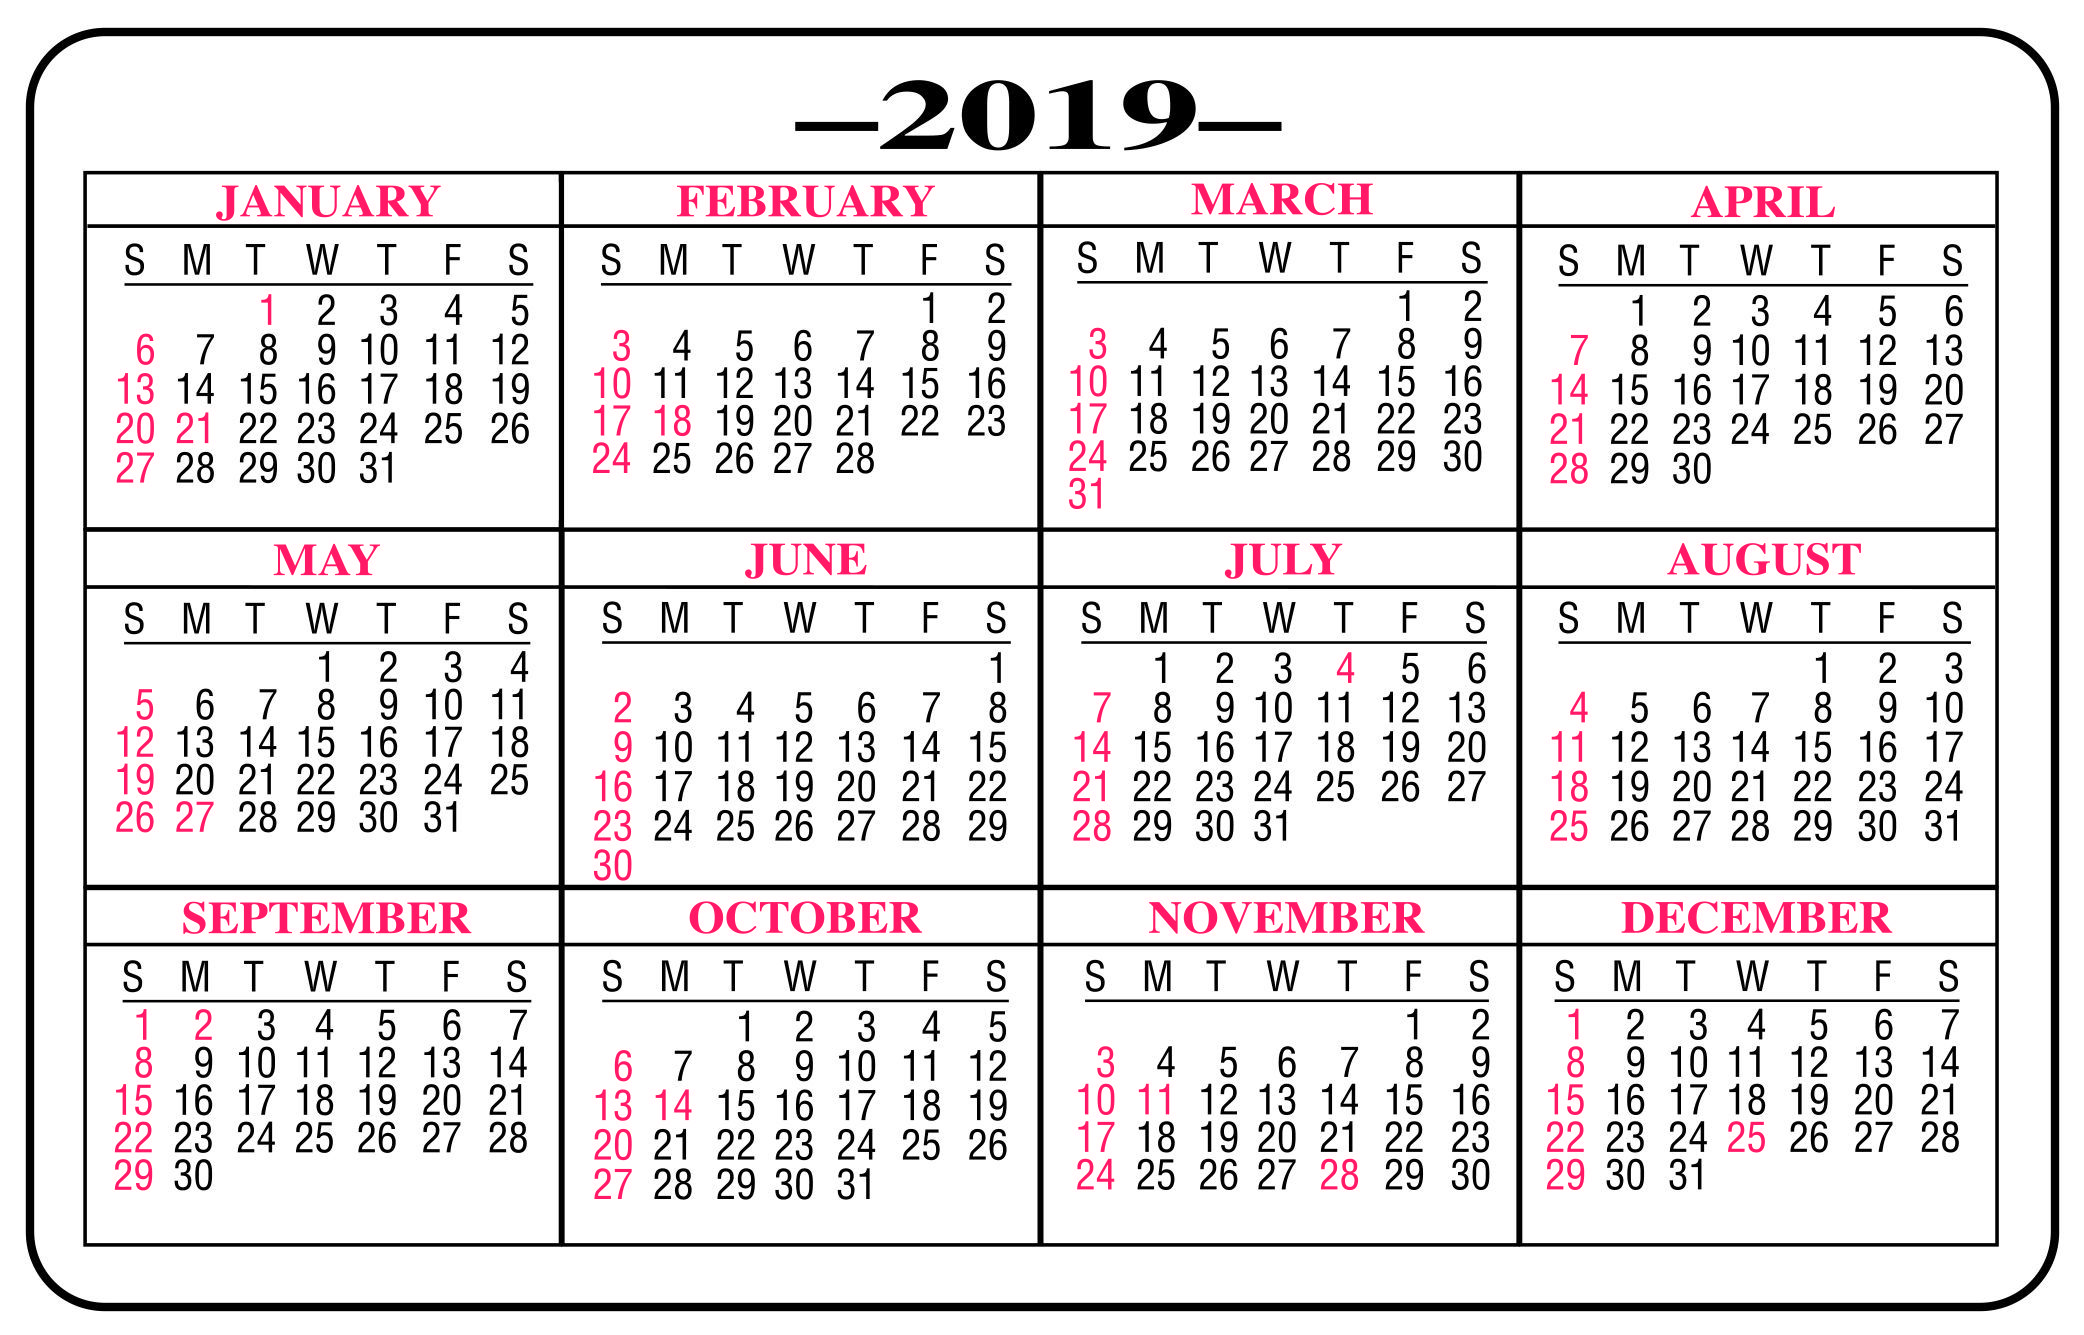 Custom Printed Wallet Calendar Cards - Promotional, Customized, Personalized, Imprinted ...